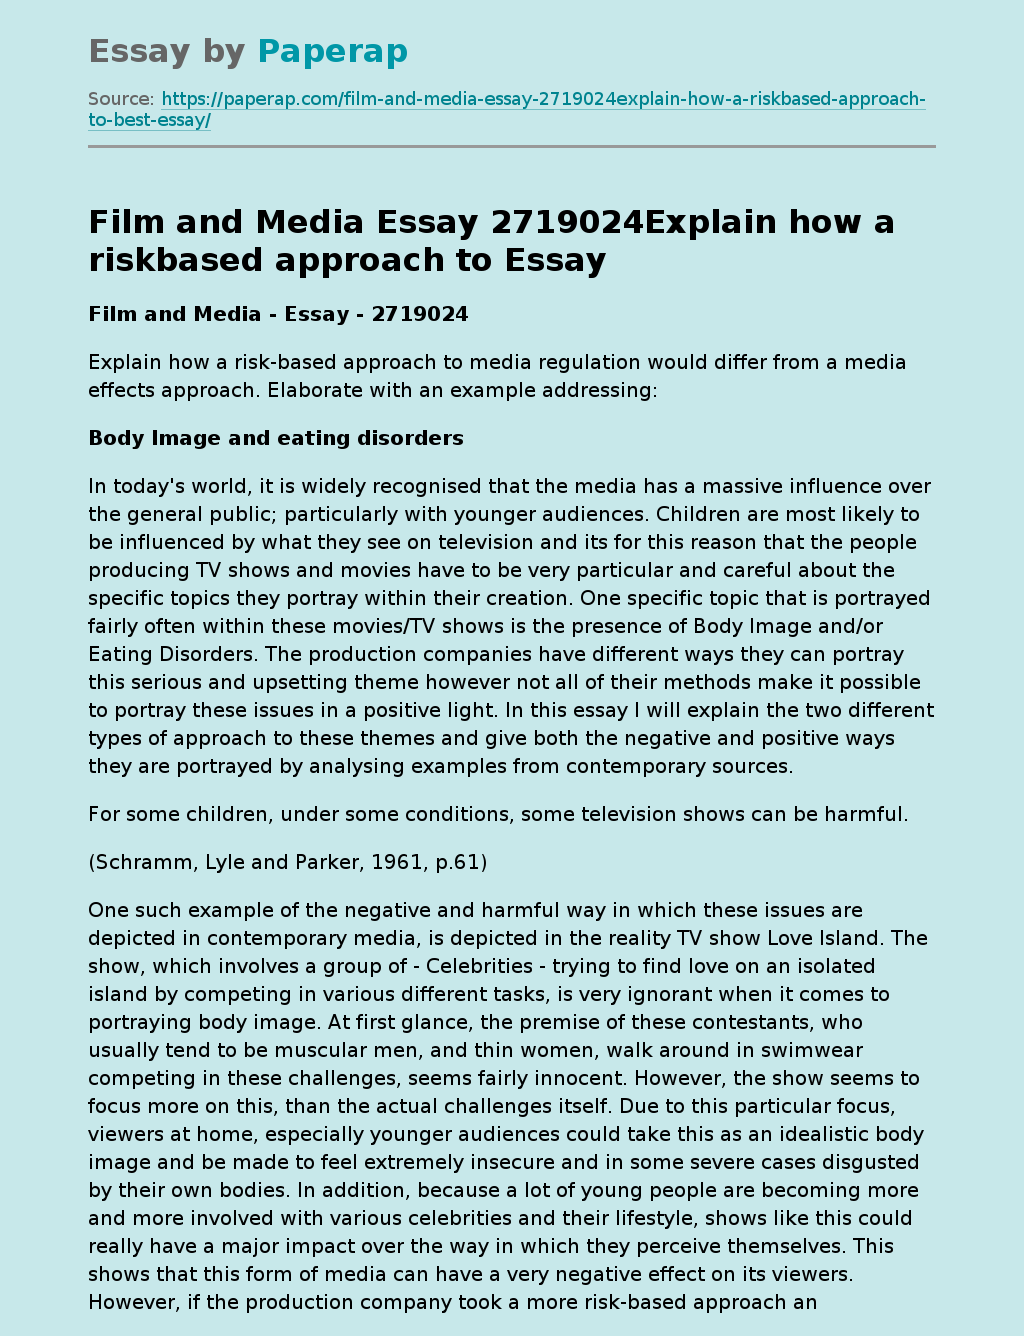 Film and Media Essay 2719024Explain how a riskbased approach to